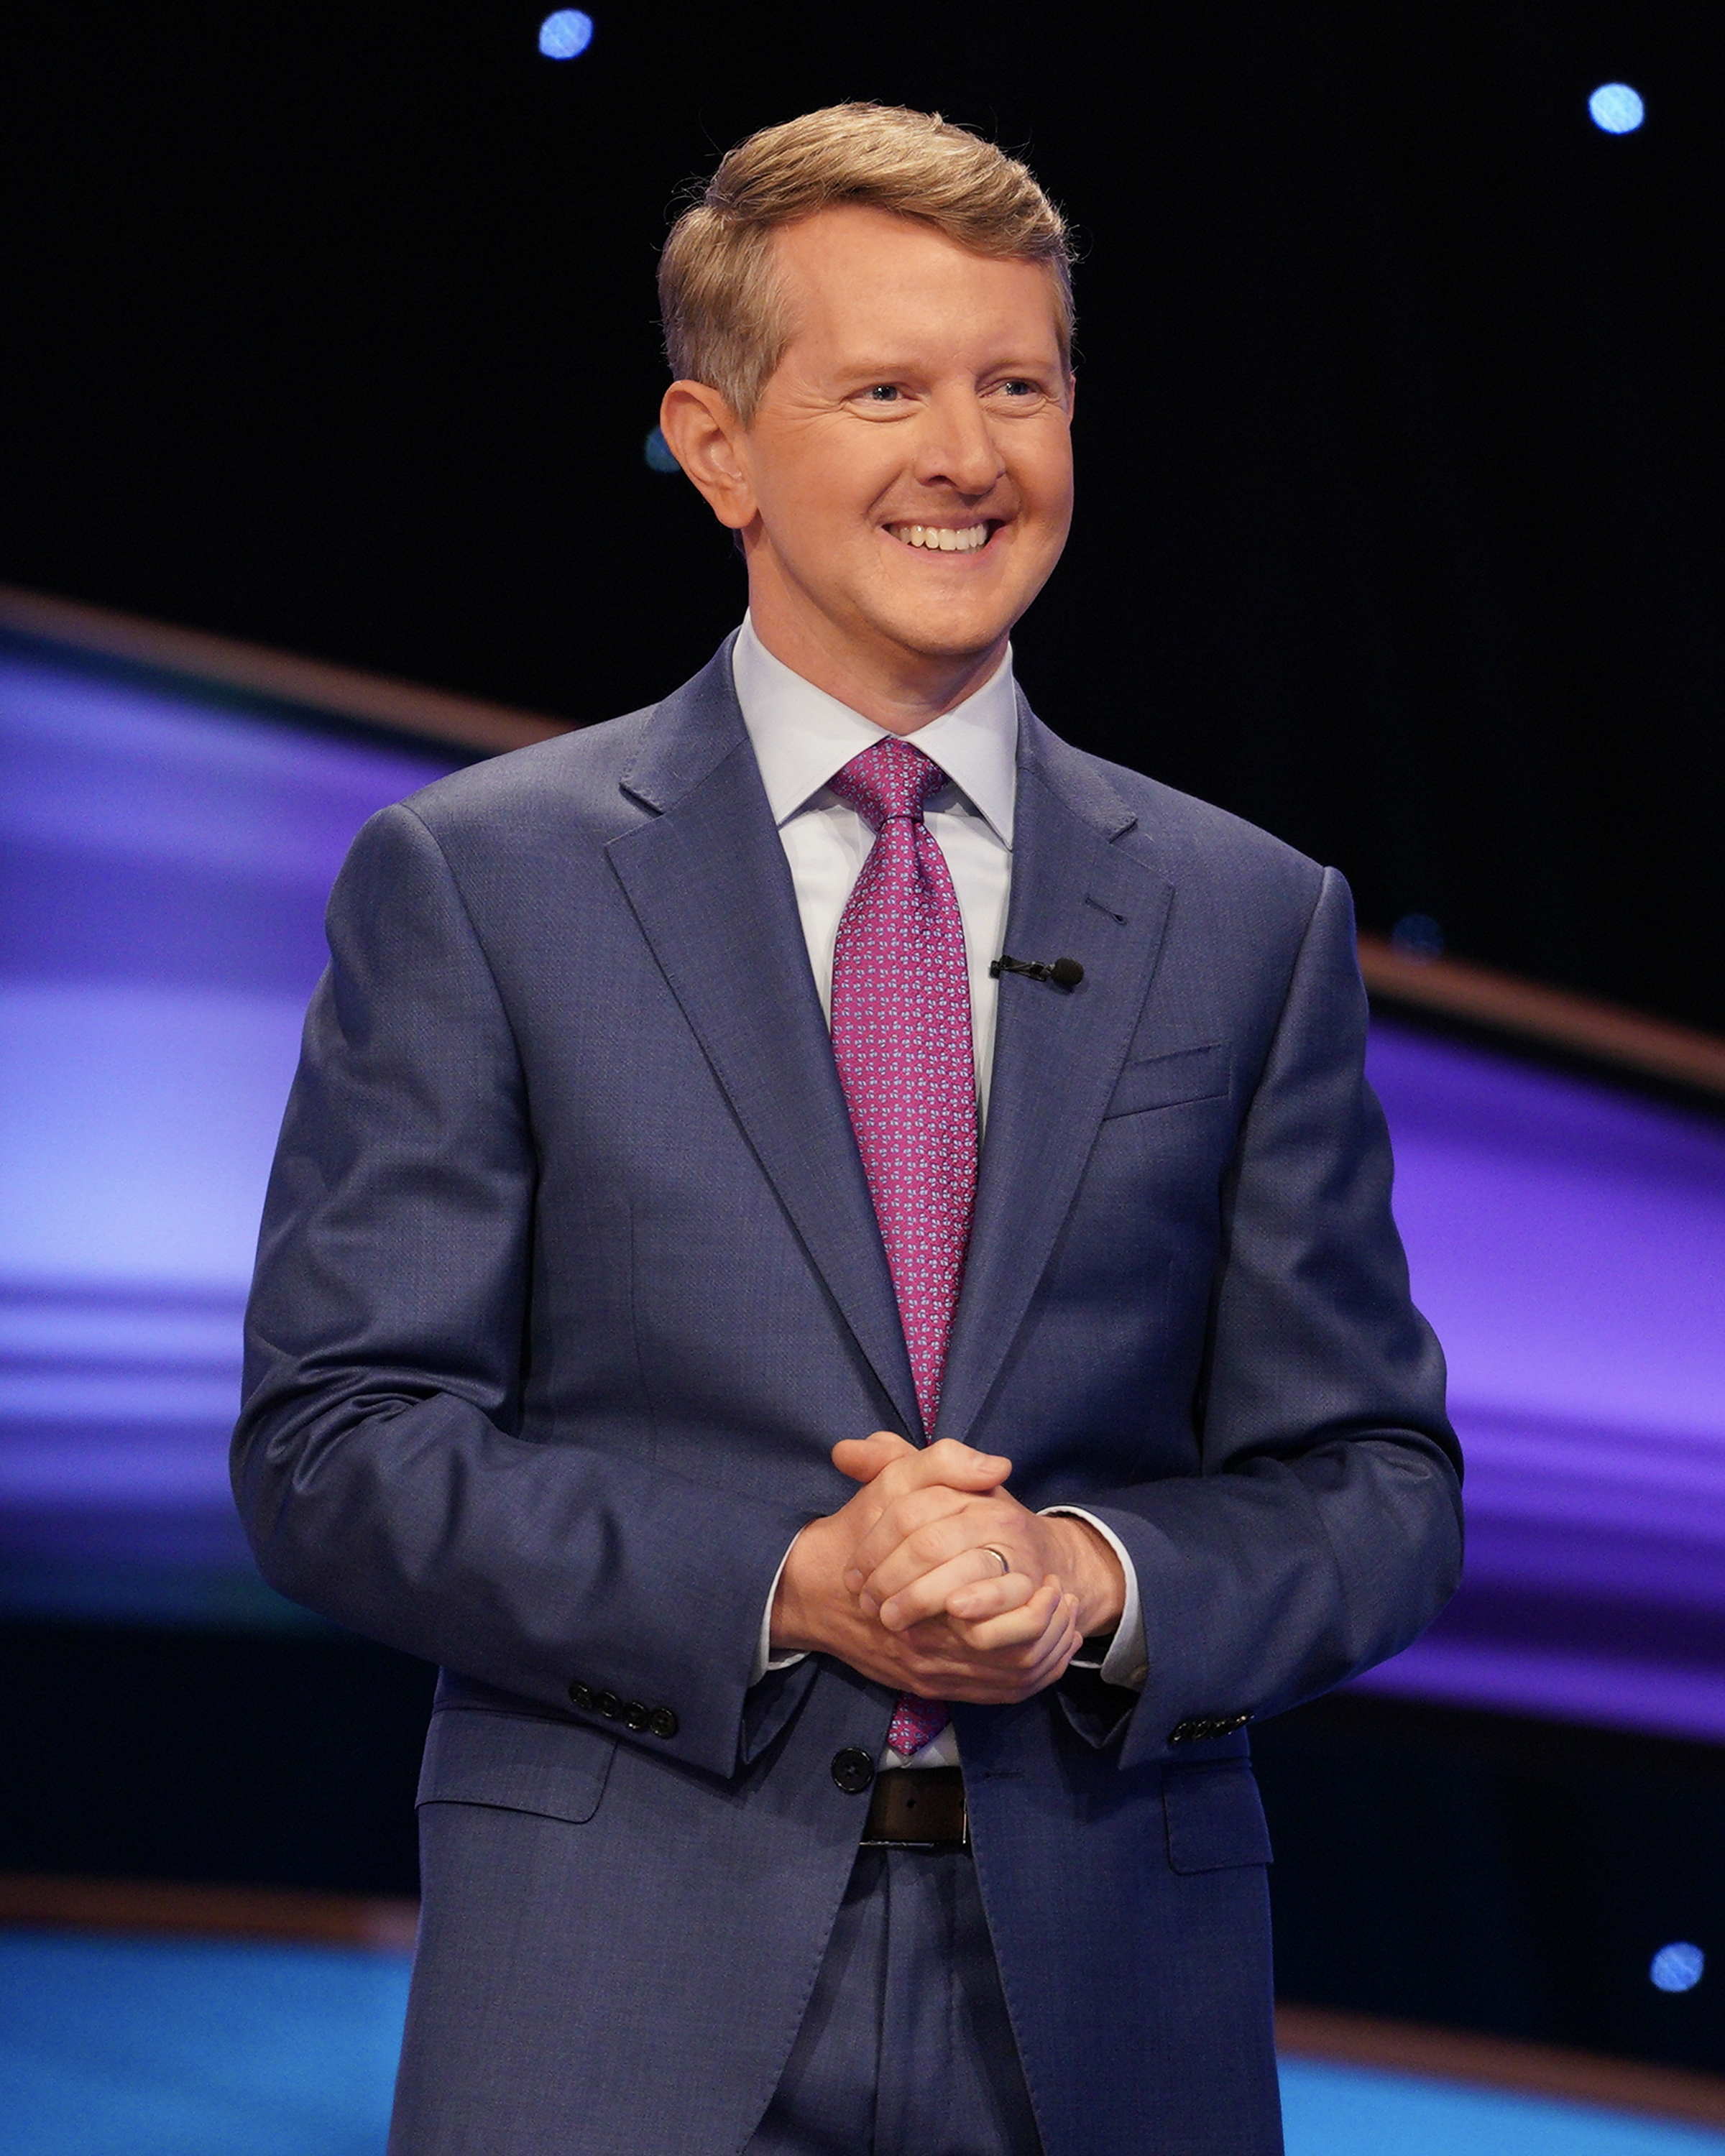 Jeopardy! - hosted by Ken Jennings - hinted they’re up to throw her in the contestant pool, as long as she passes the test